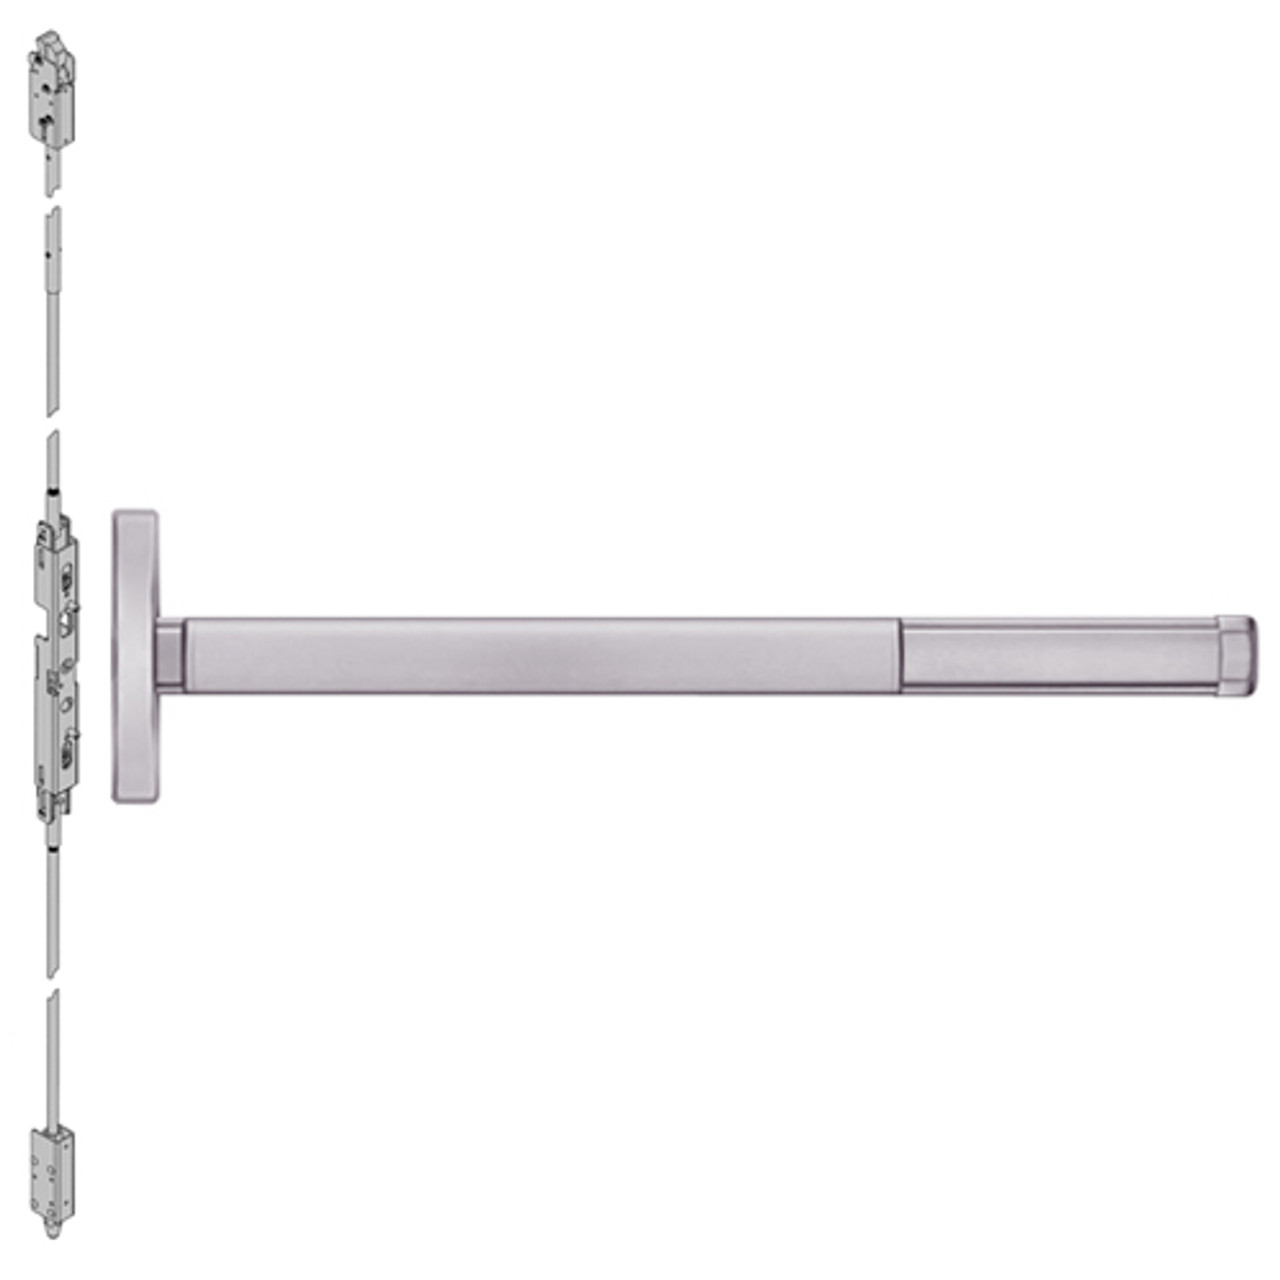 DEFL2614-630-36 PHI 2600 Series Fire Rated Concealed Vertical Rod Exit Device with Delayed Egress Prepped for Lever Always Active in Satin Stainless Steel Finish